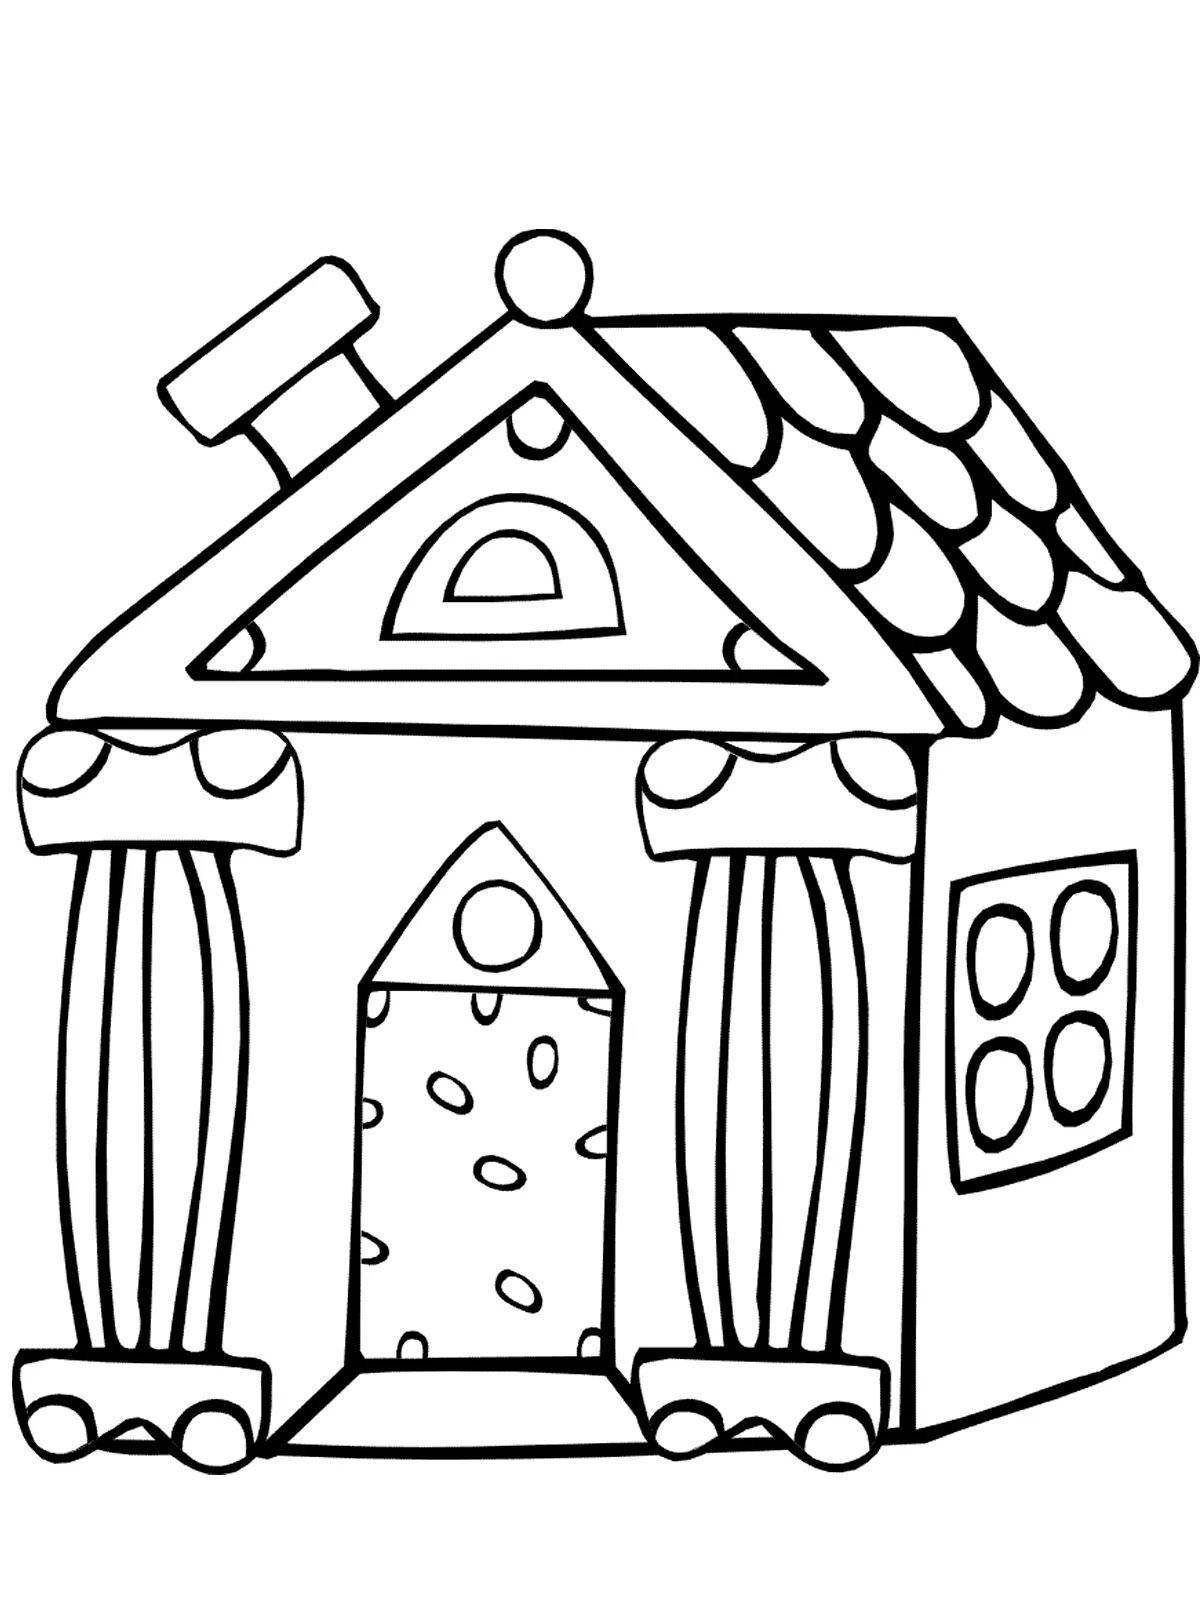 Colored house coloring book for 3-4 year olds